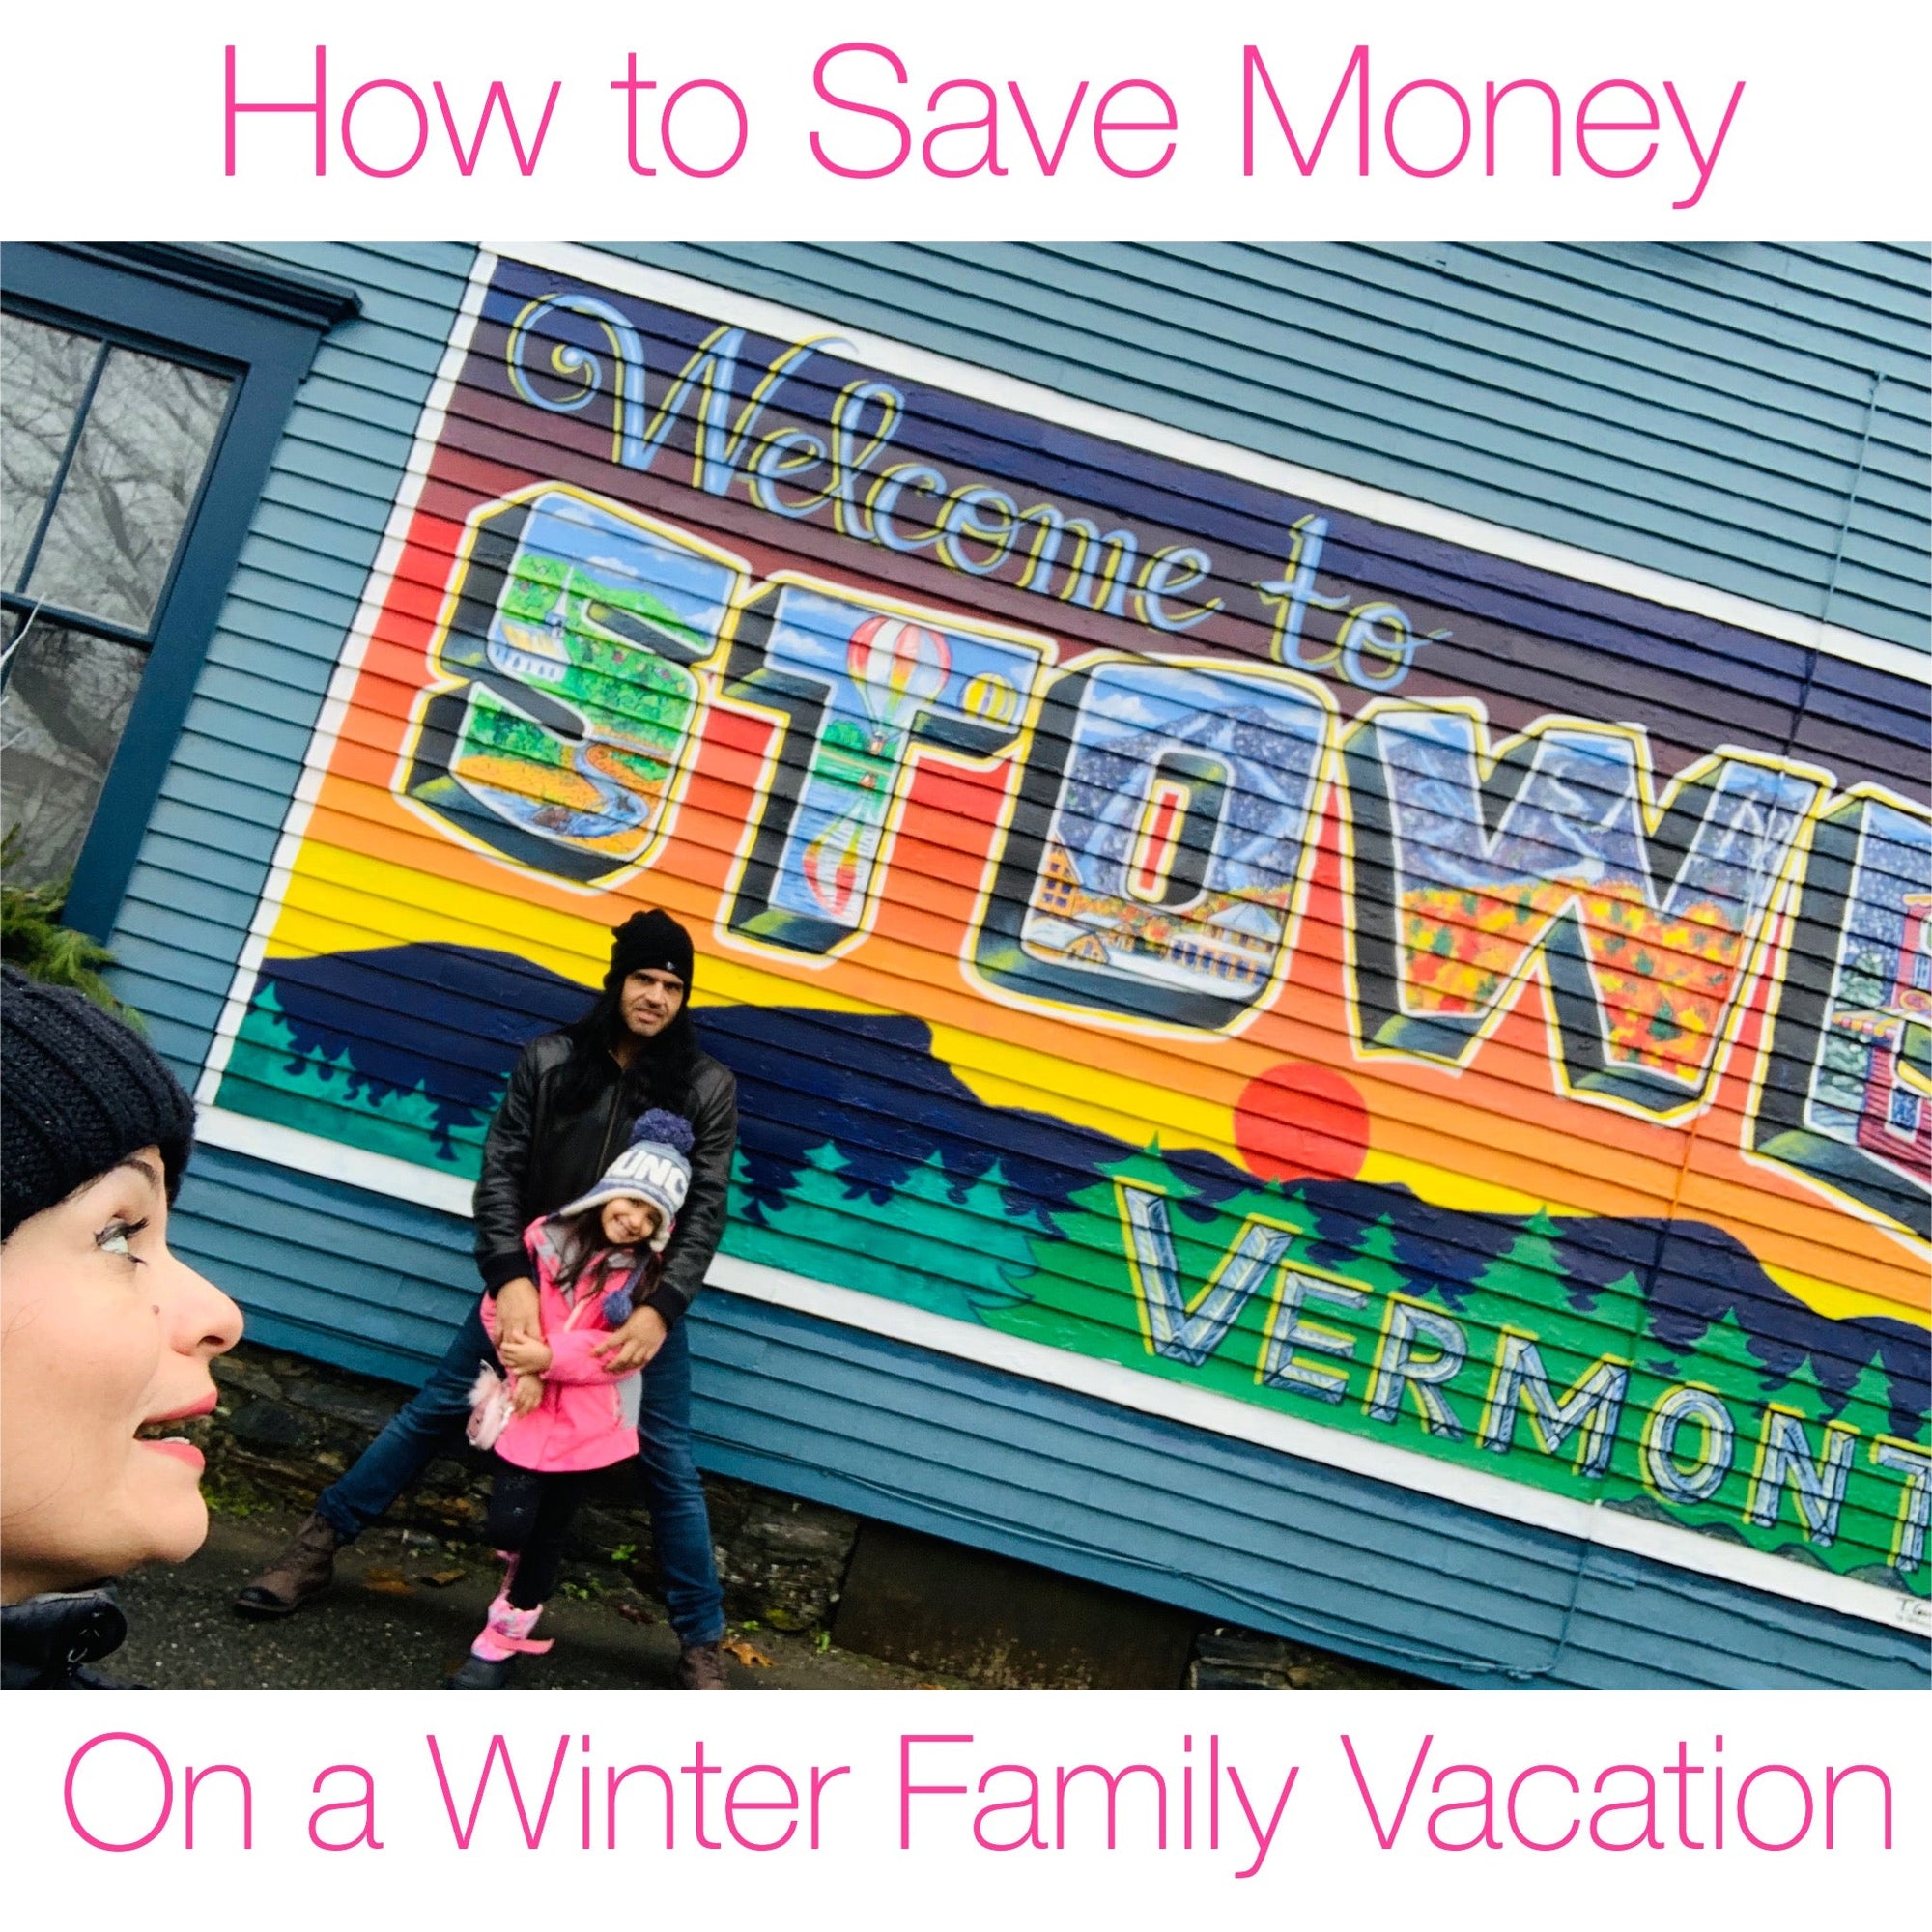 How to Save Money on a Winter Family Vacation - Mi LegaSi